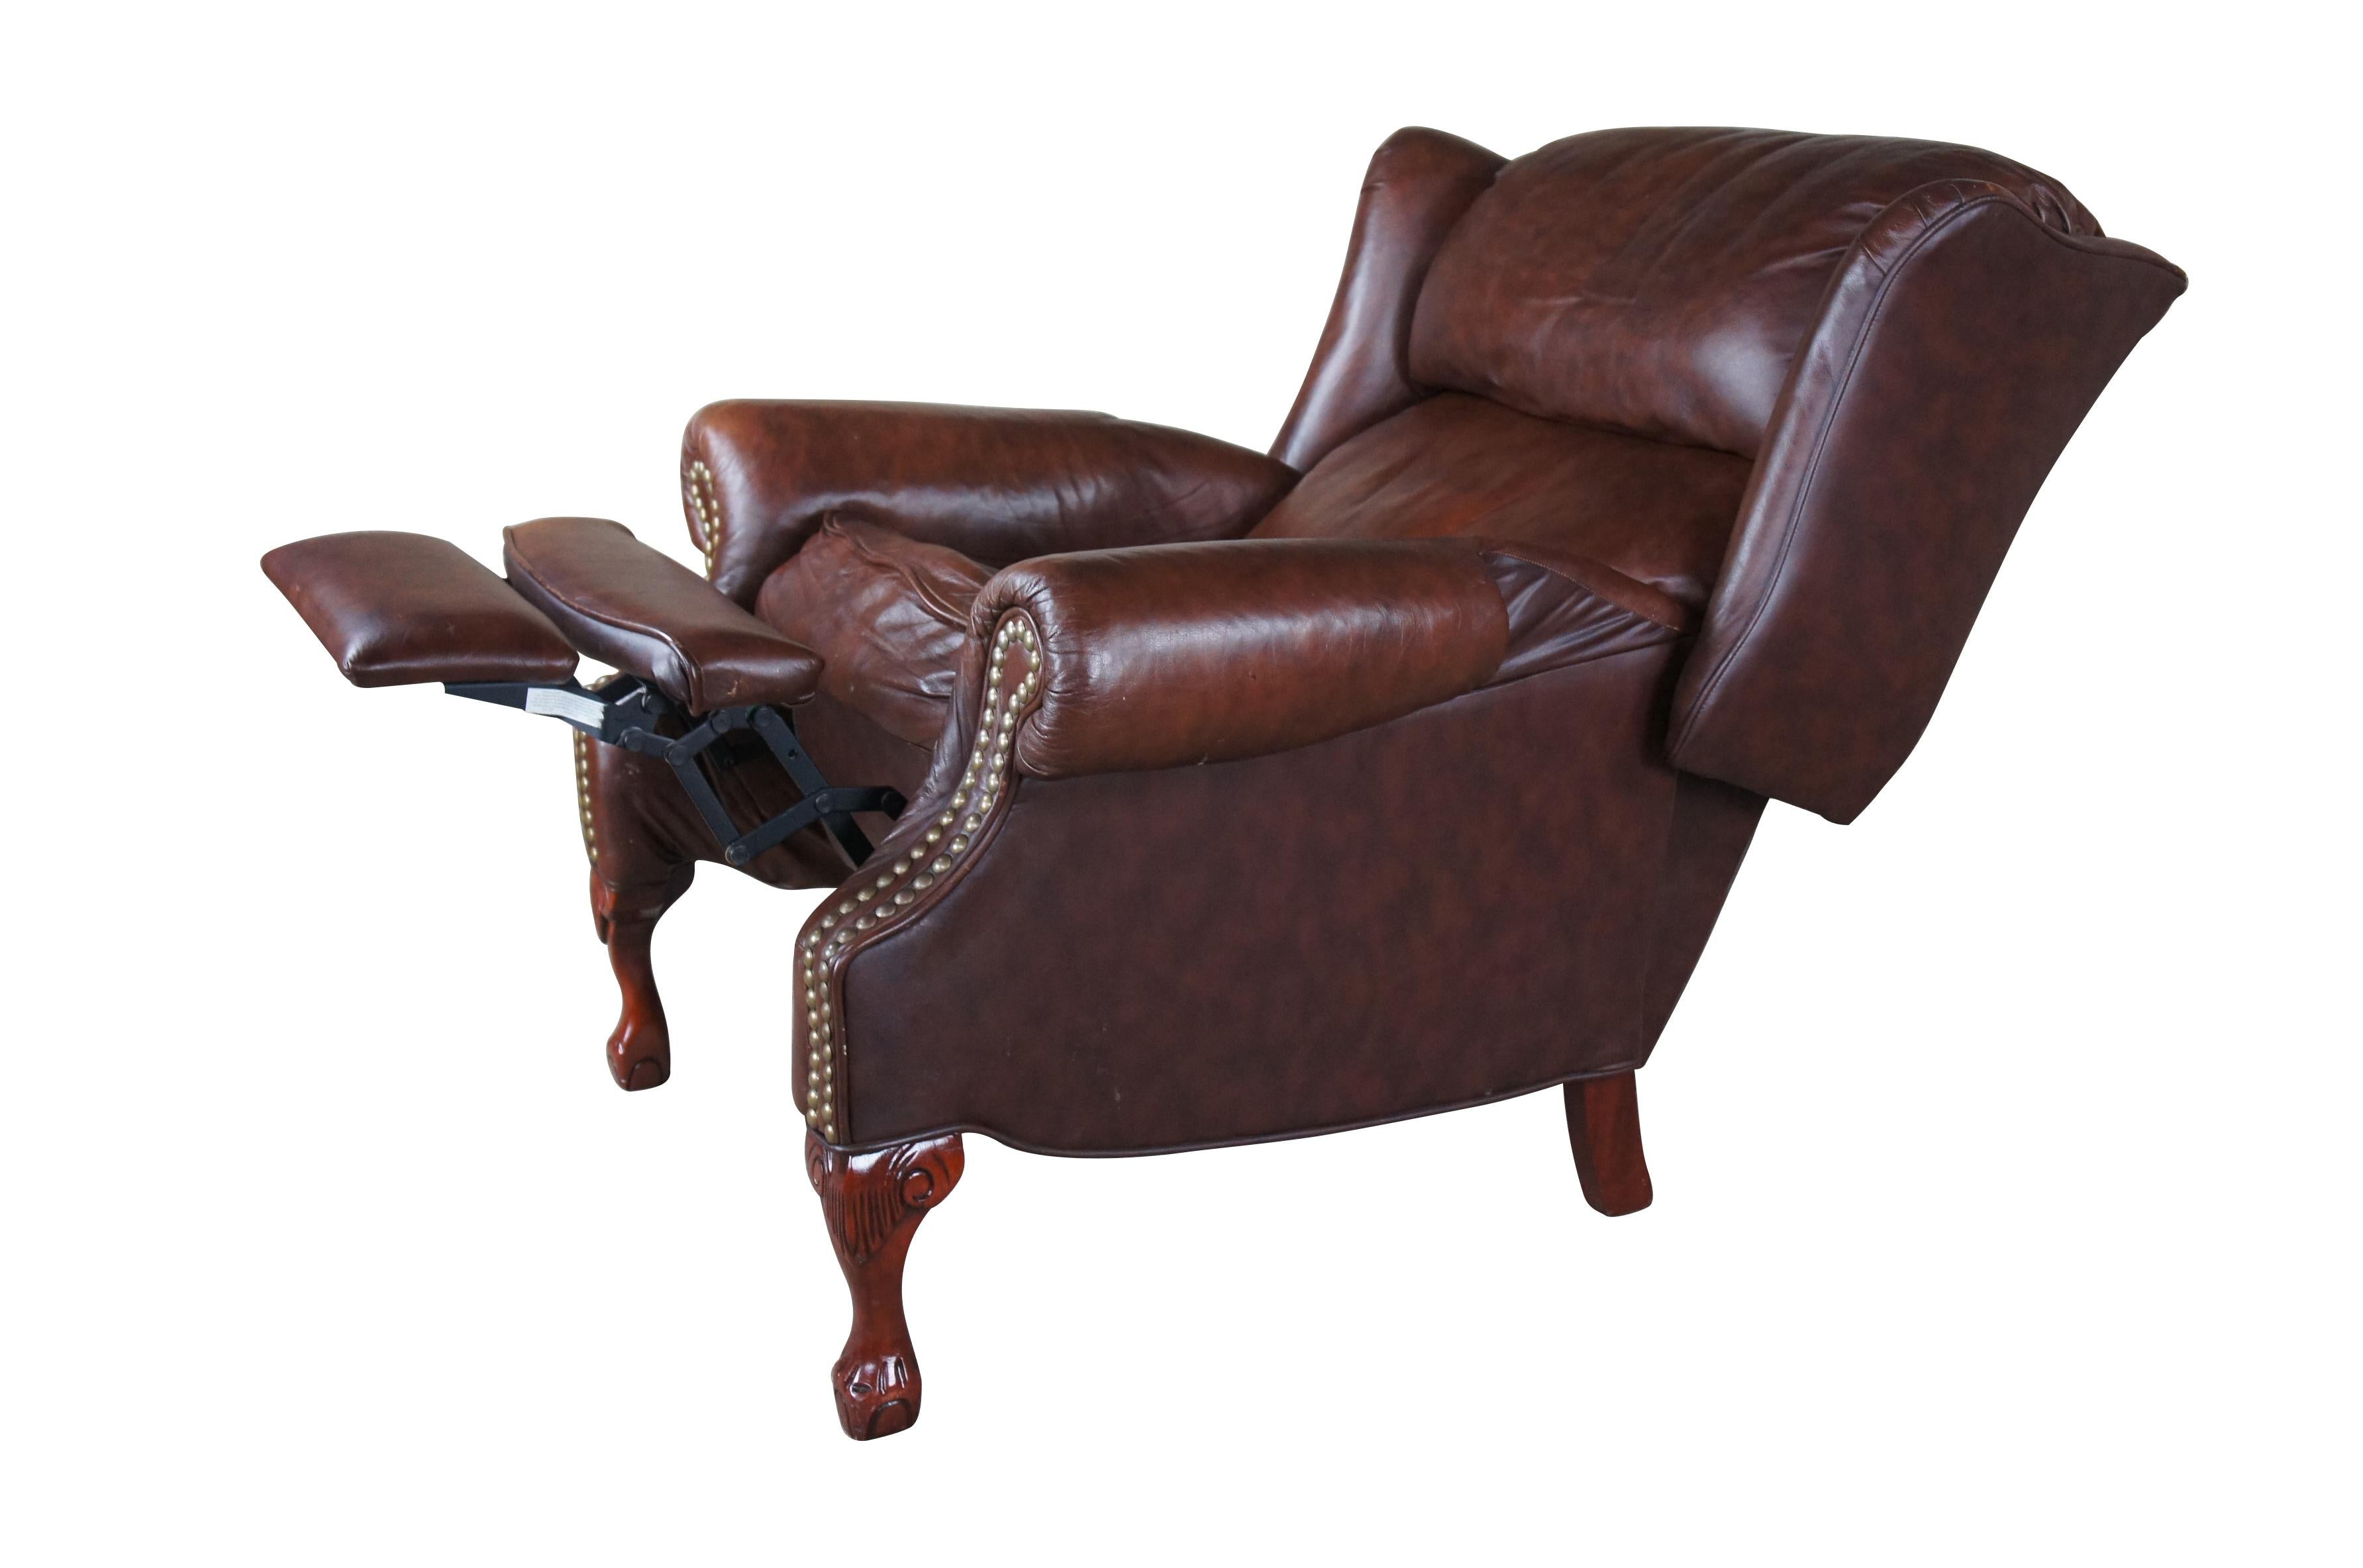 Vintage Bradington Young Maxwell Wingback Club Chair.  Drawing inspiration from iconic chippendale styling.  Features rolled arms, nailhead trim and acanthus carved ball and claw feet.   Chair reclines by pushing back along the seat.  Made in